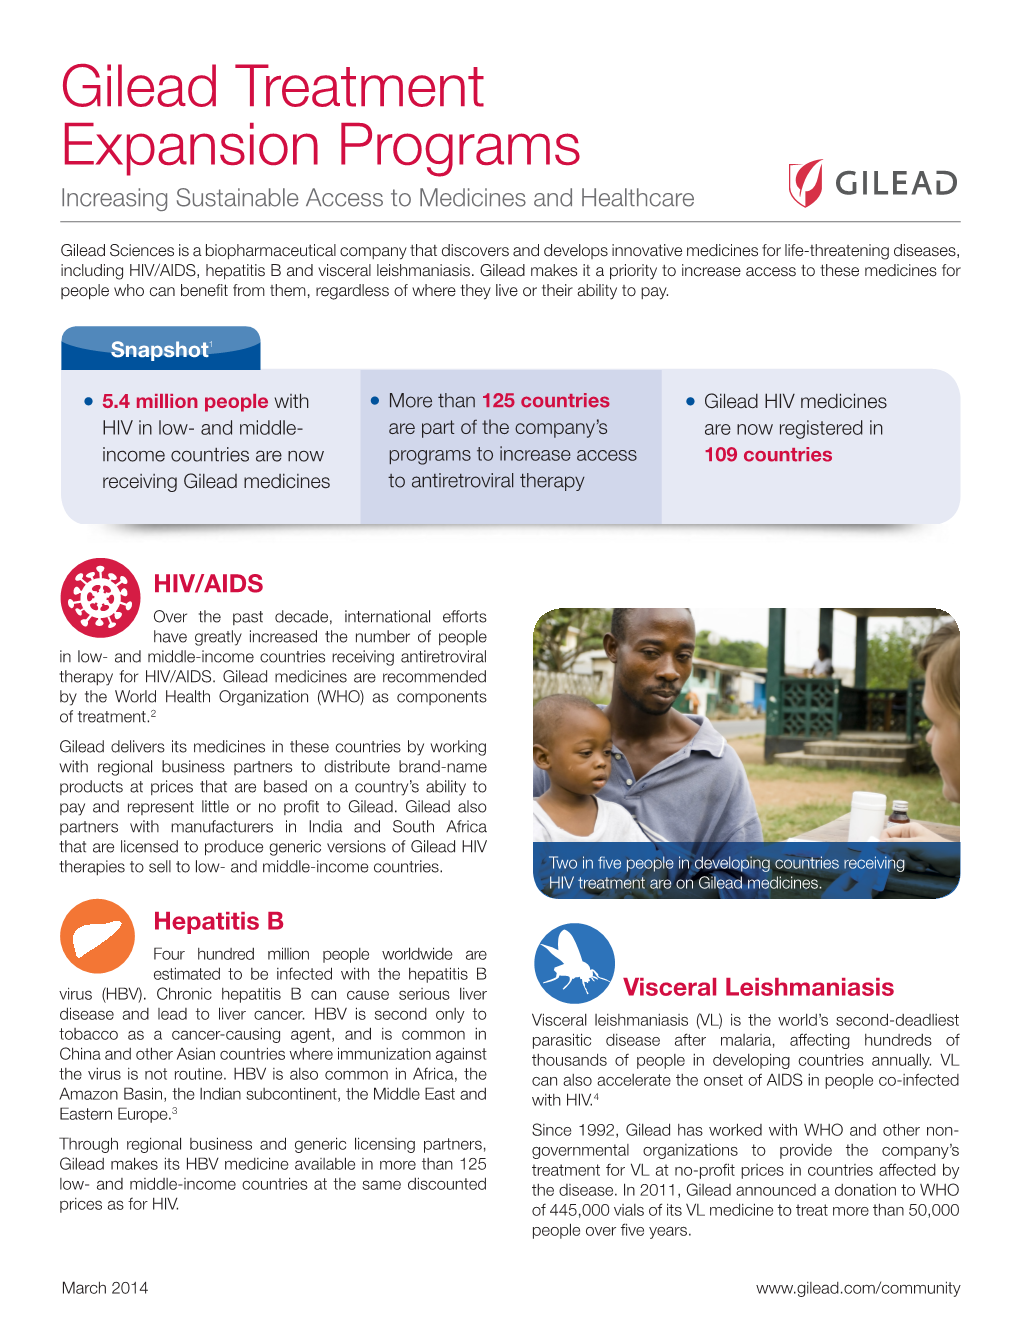 Gilead Treatment Expansion Programs Increasing Sustainable Access to Medicines and Healthcare